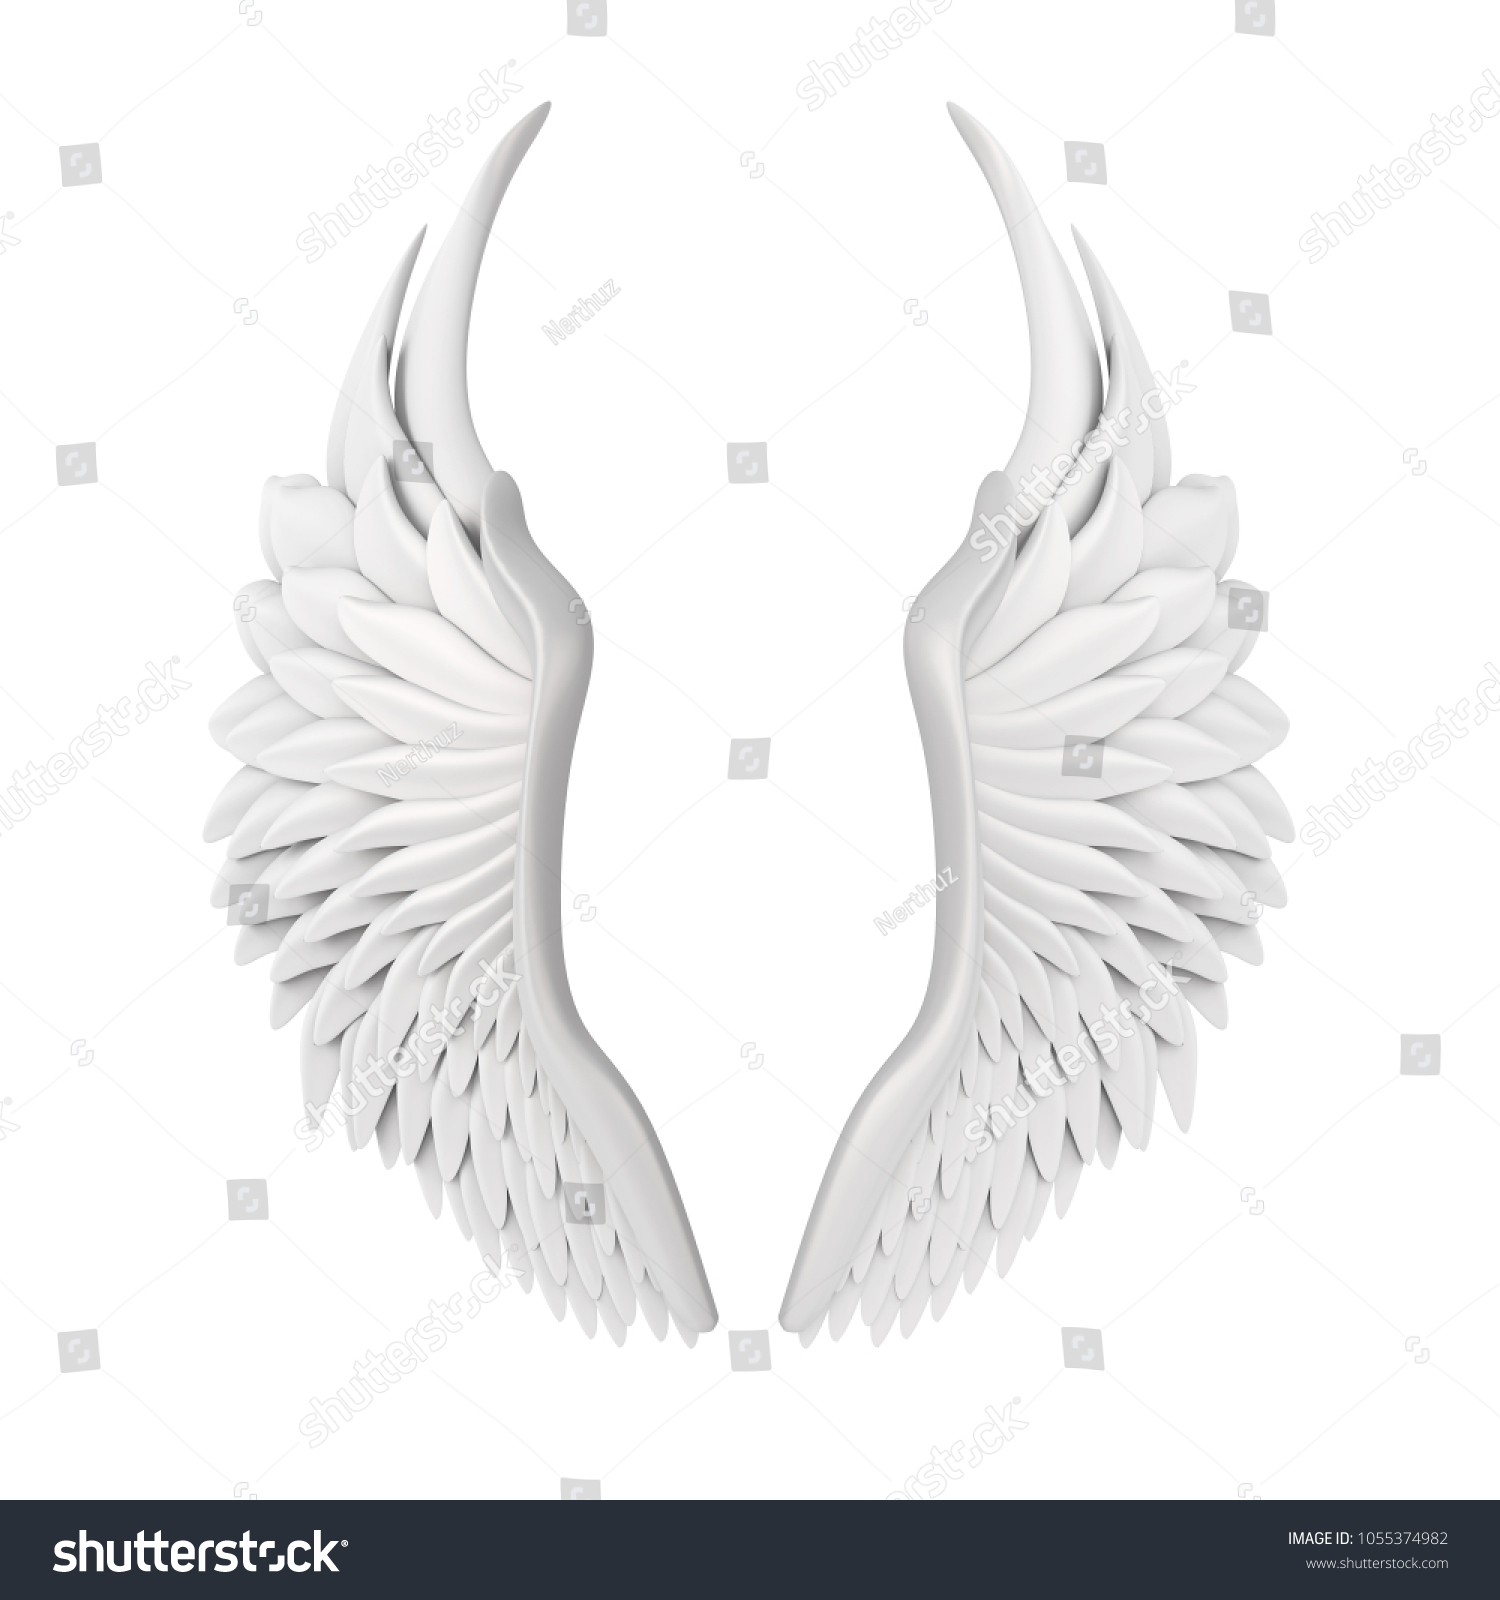 White Angel Wings Isolated 3d Rendering Stock Illustration ...